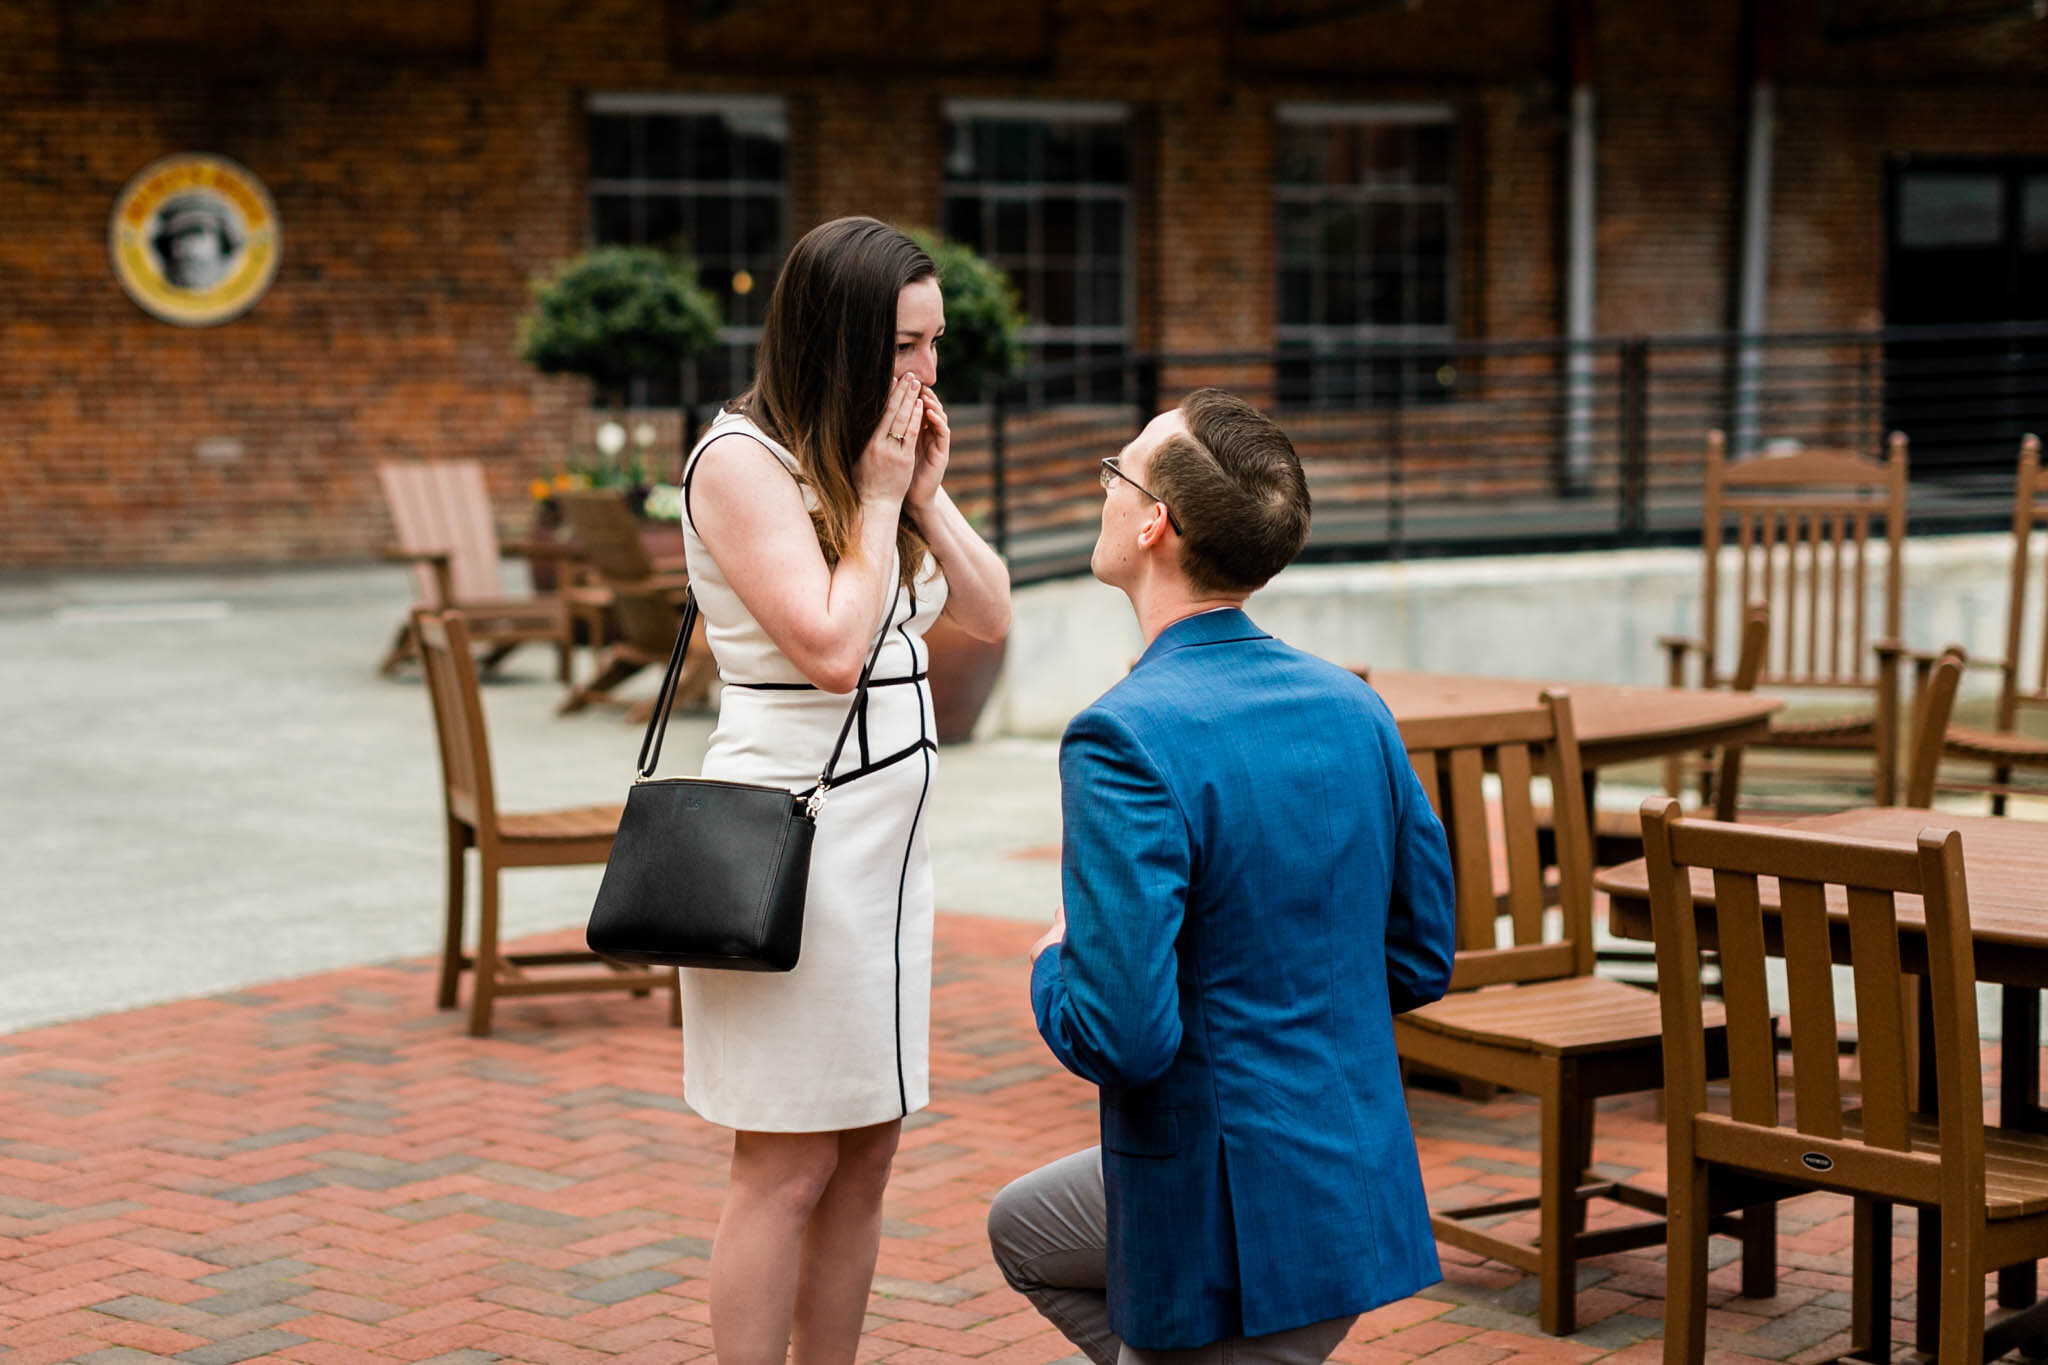 Durham Photographer | By G. Lin Photography | Woman with hands over mouth as man proposes